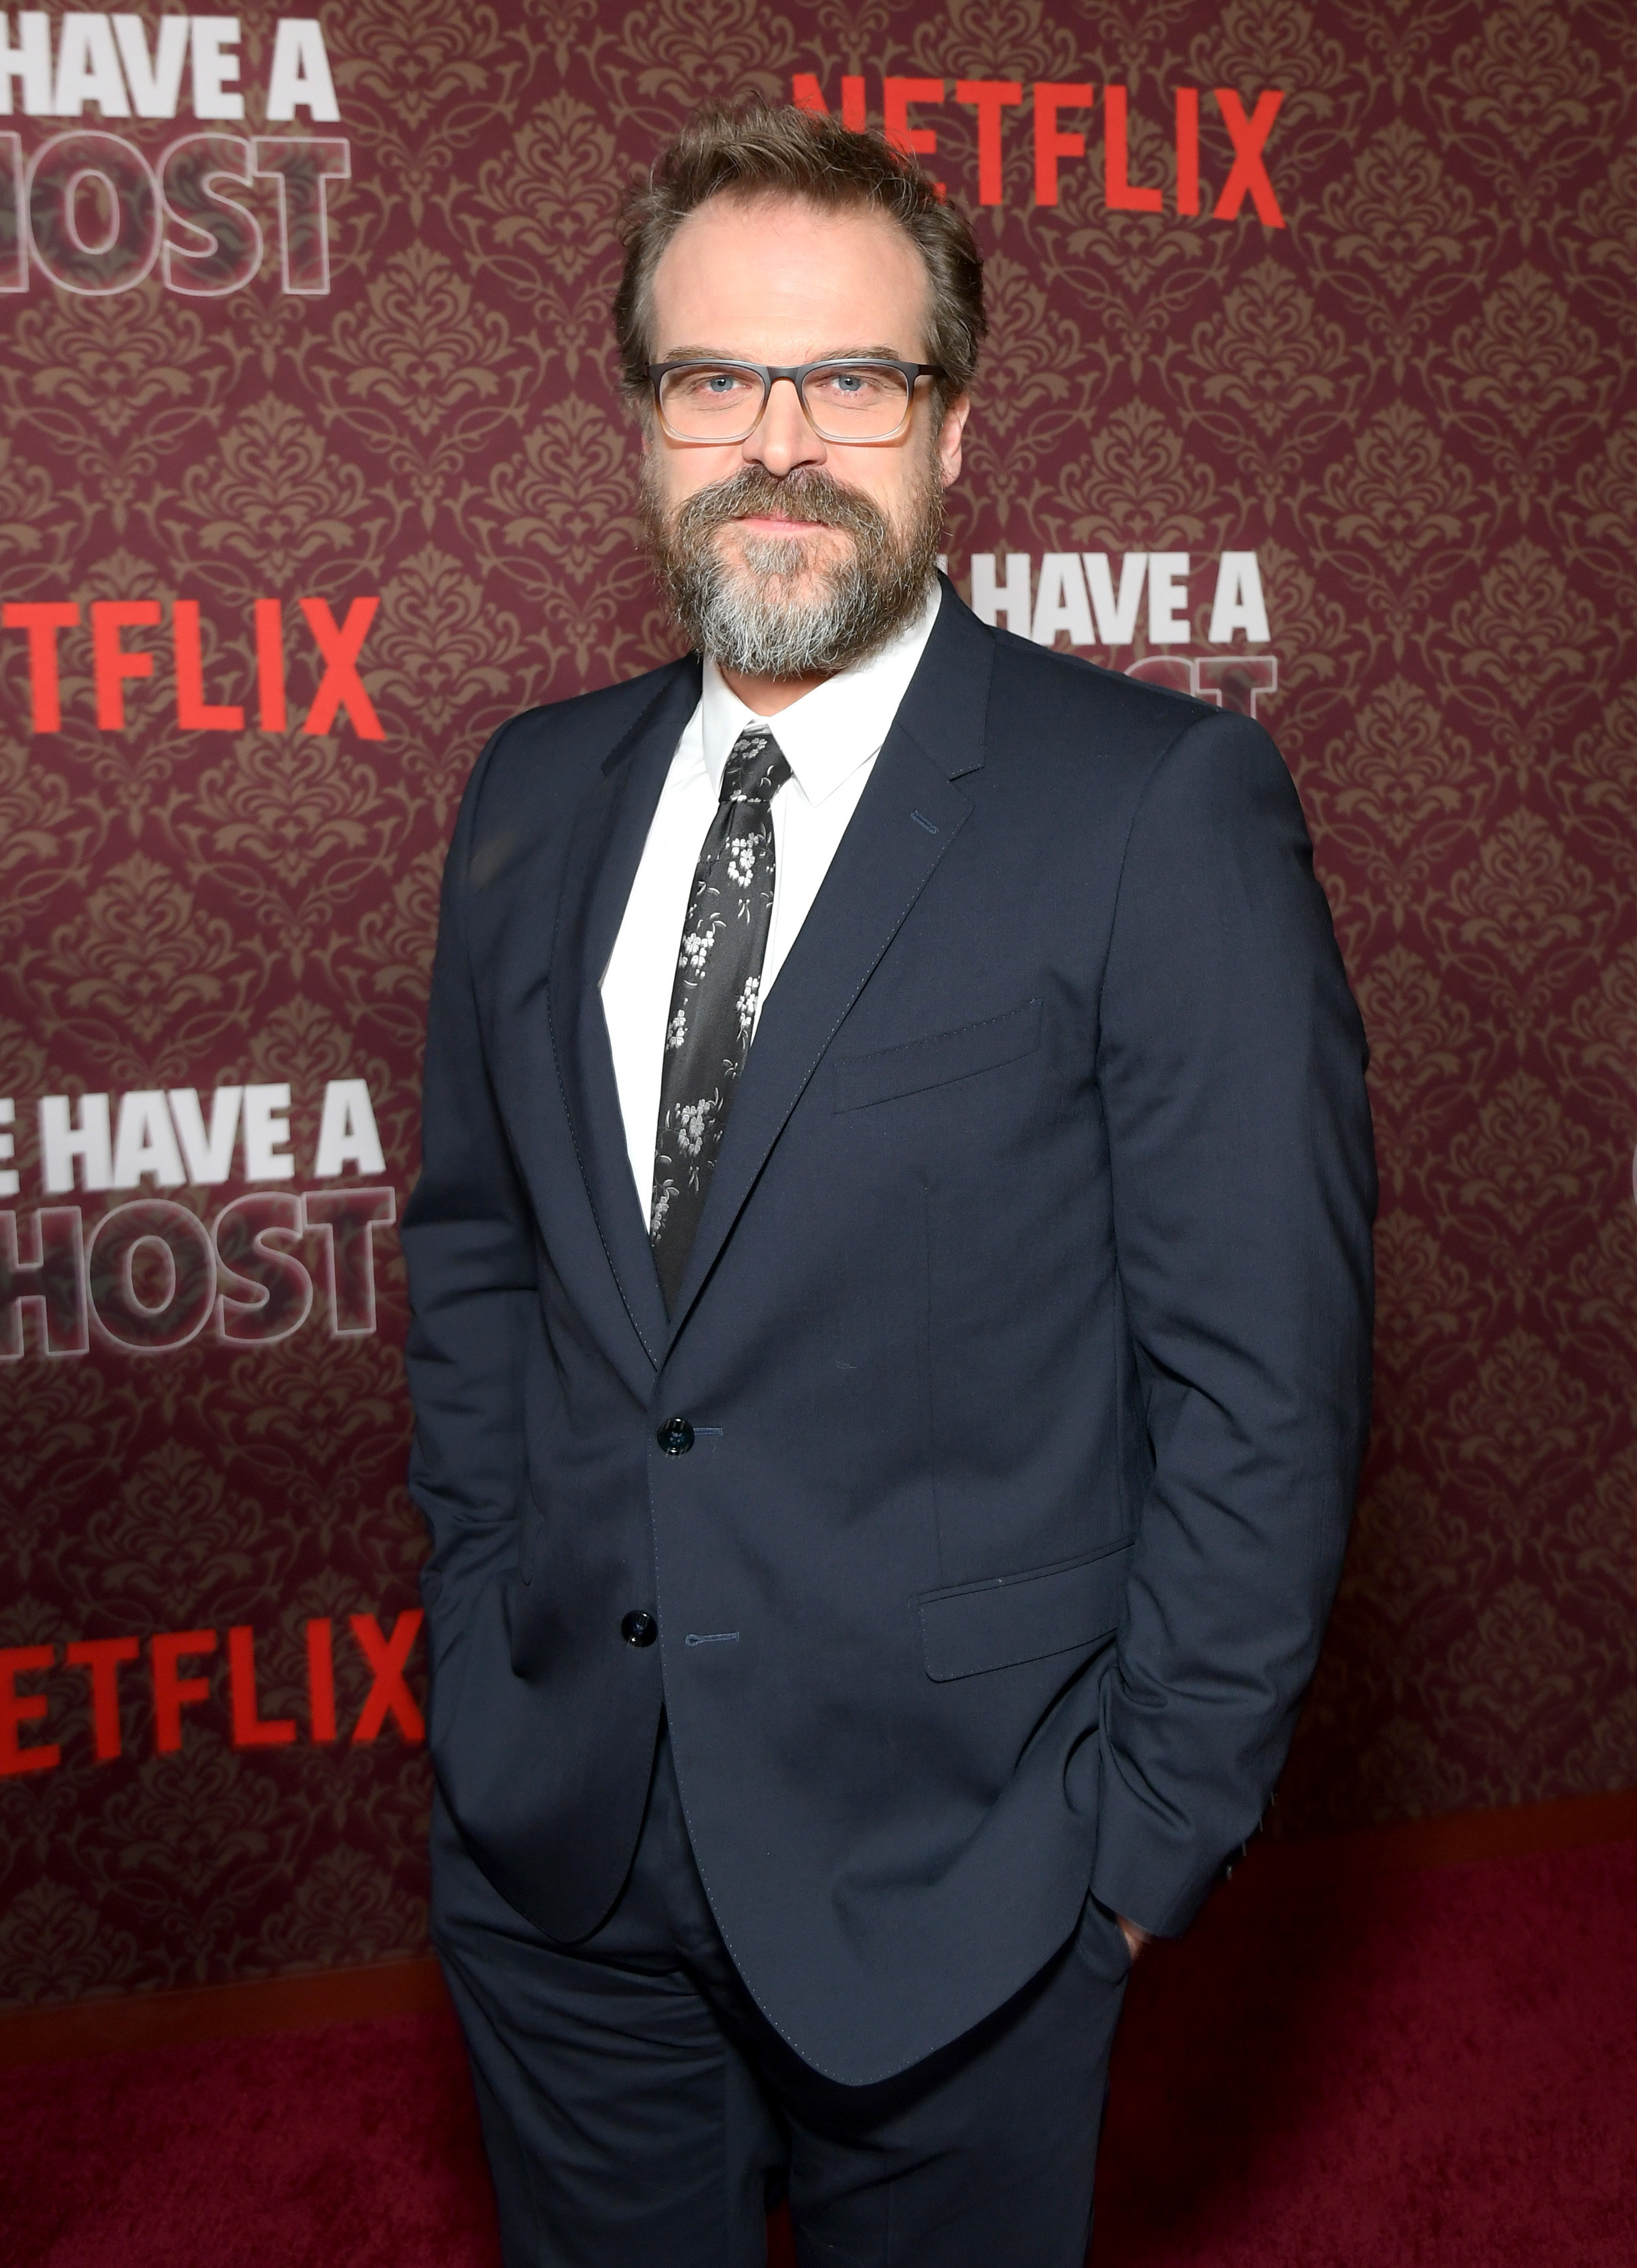 David Harbour on the red carpet